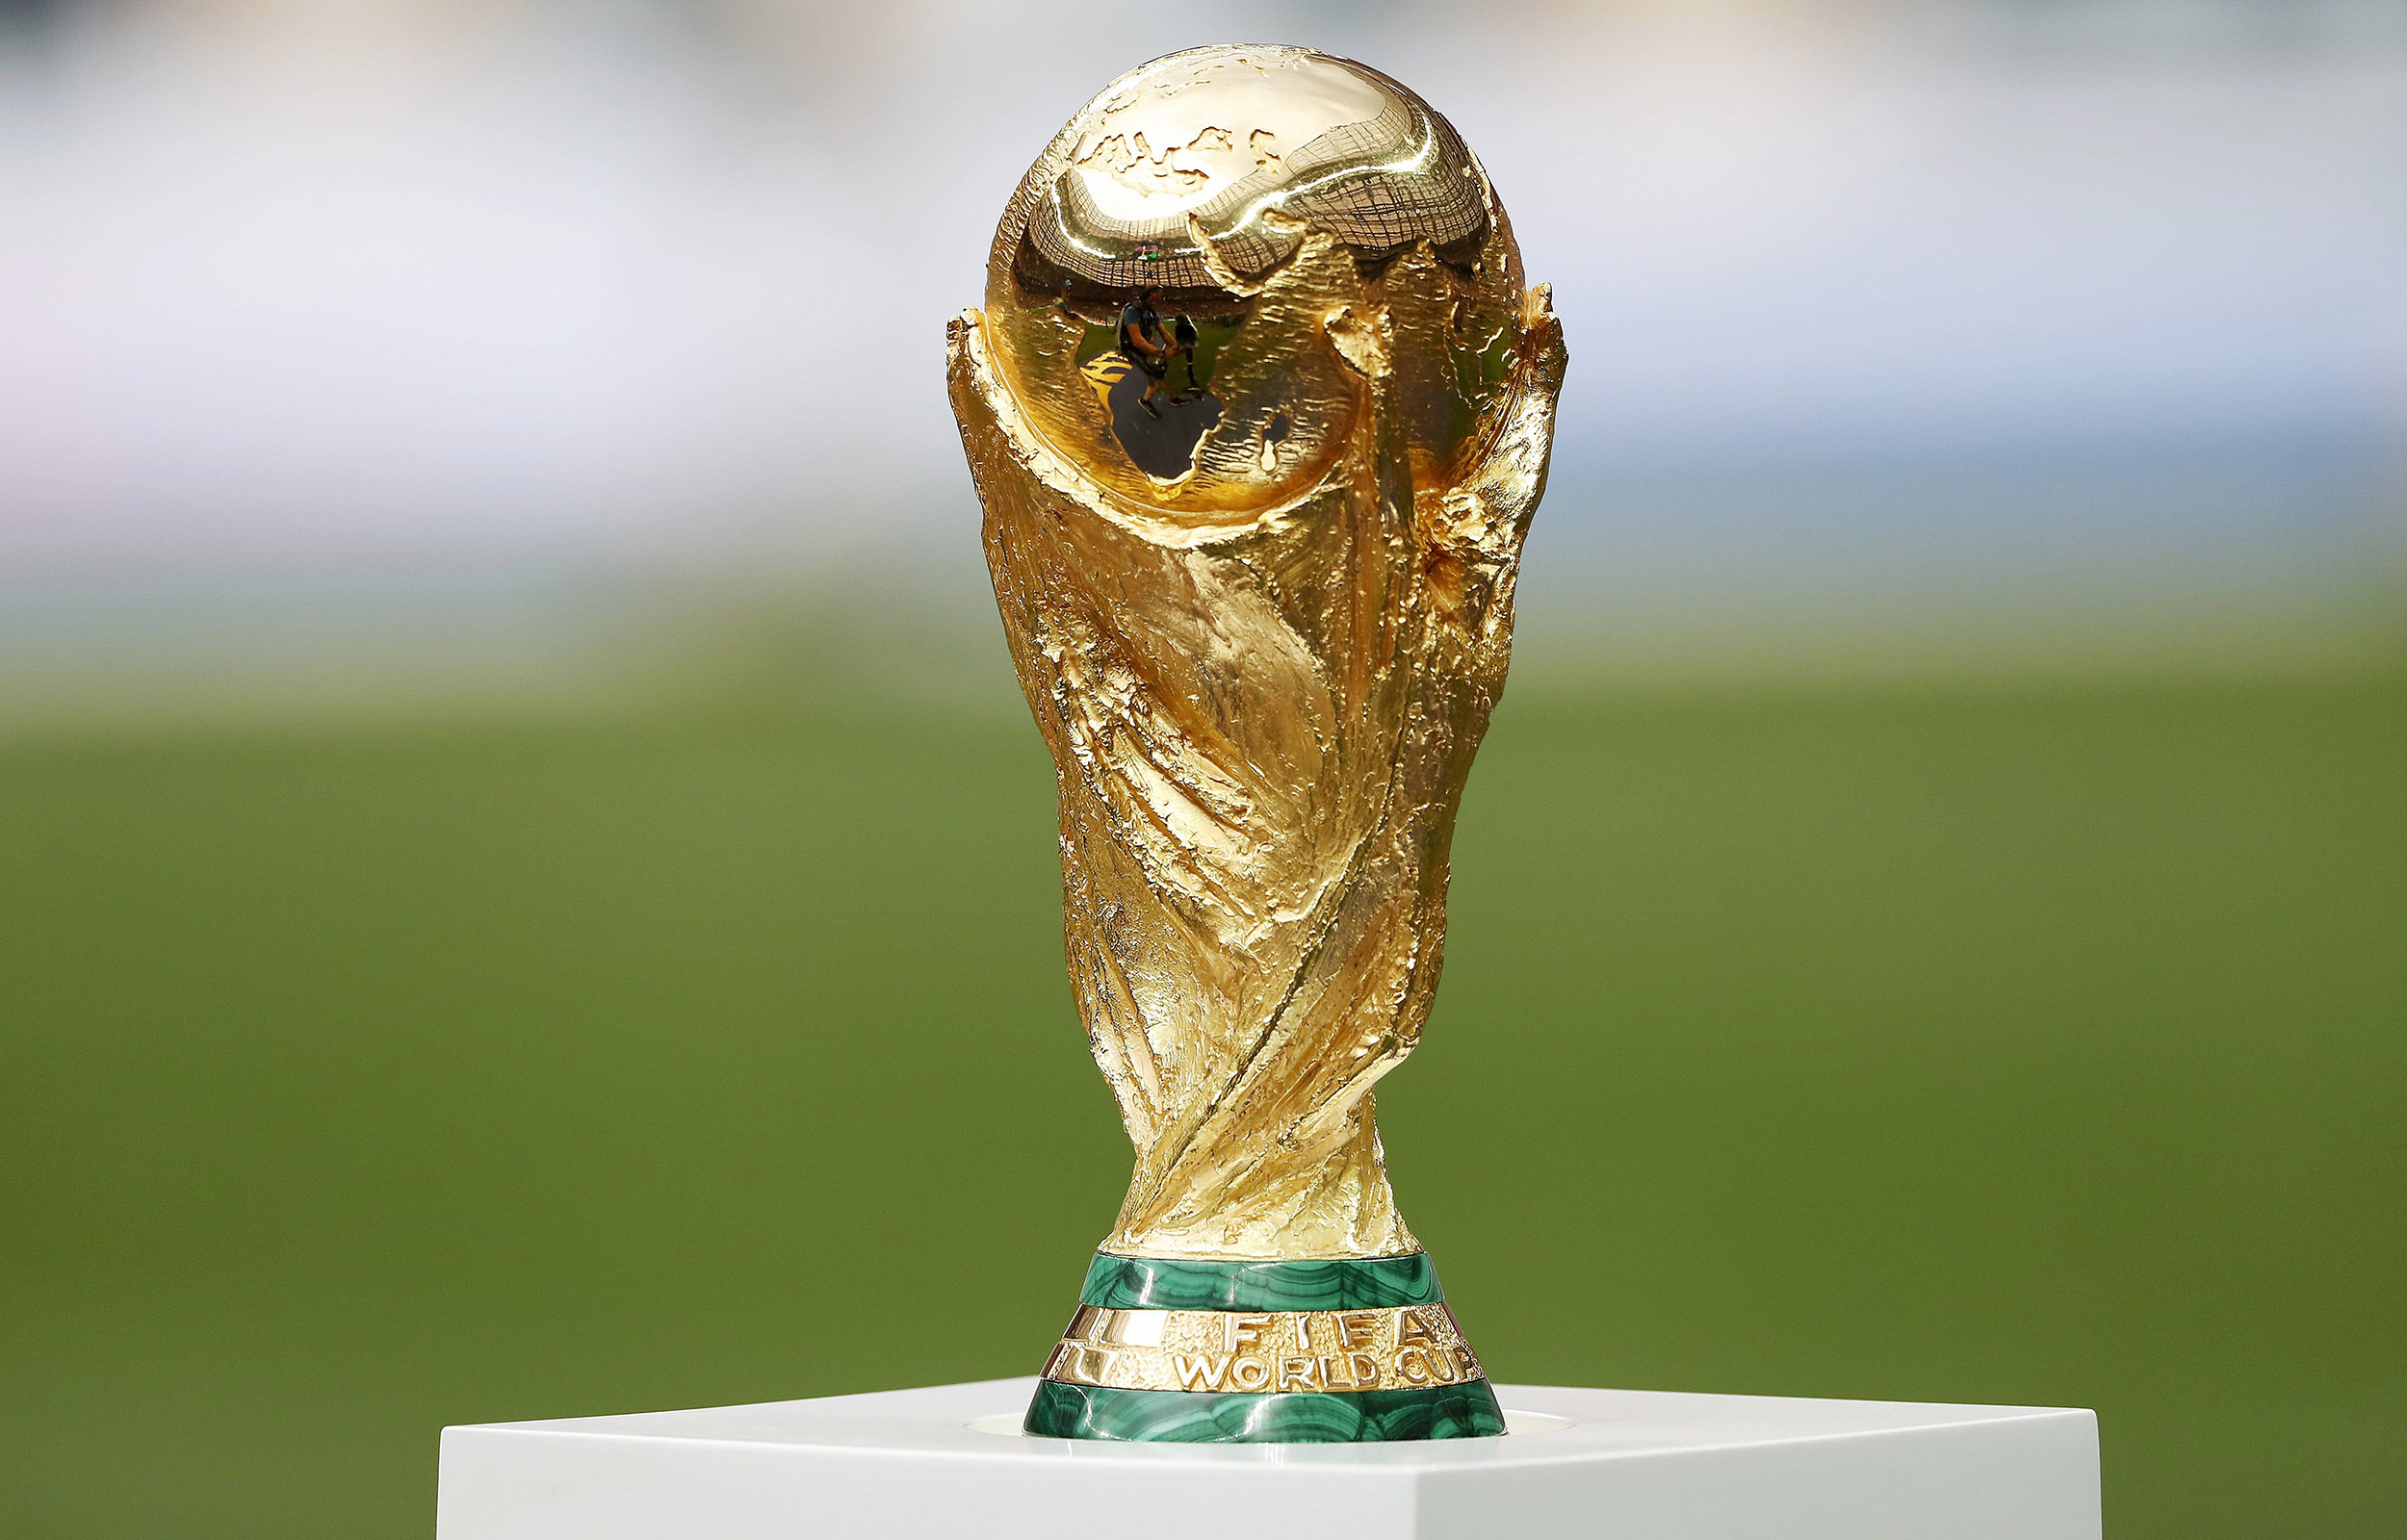 The FIFA World Cup and the Human Rights situation in Qatar